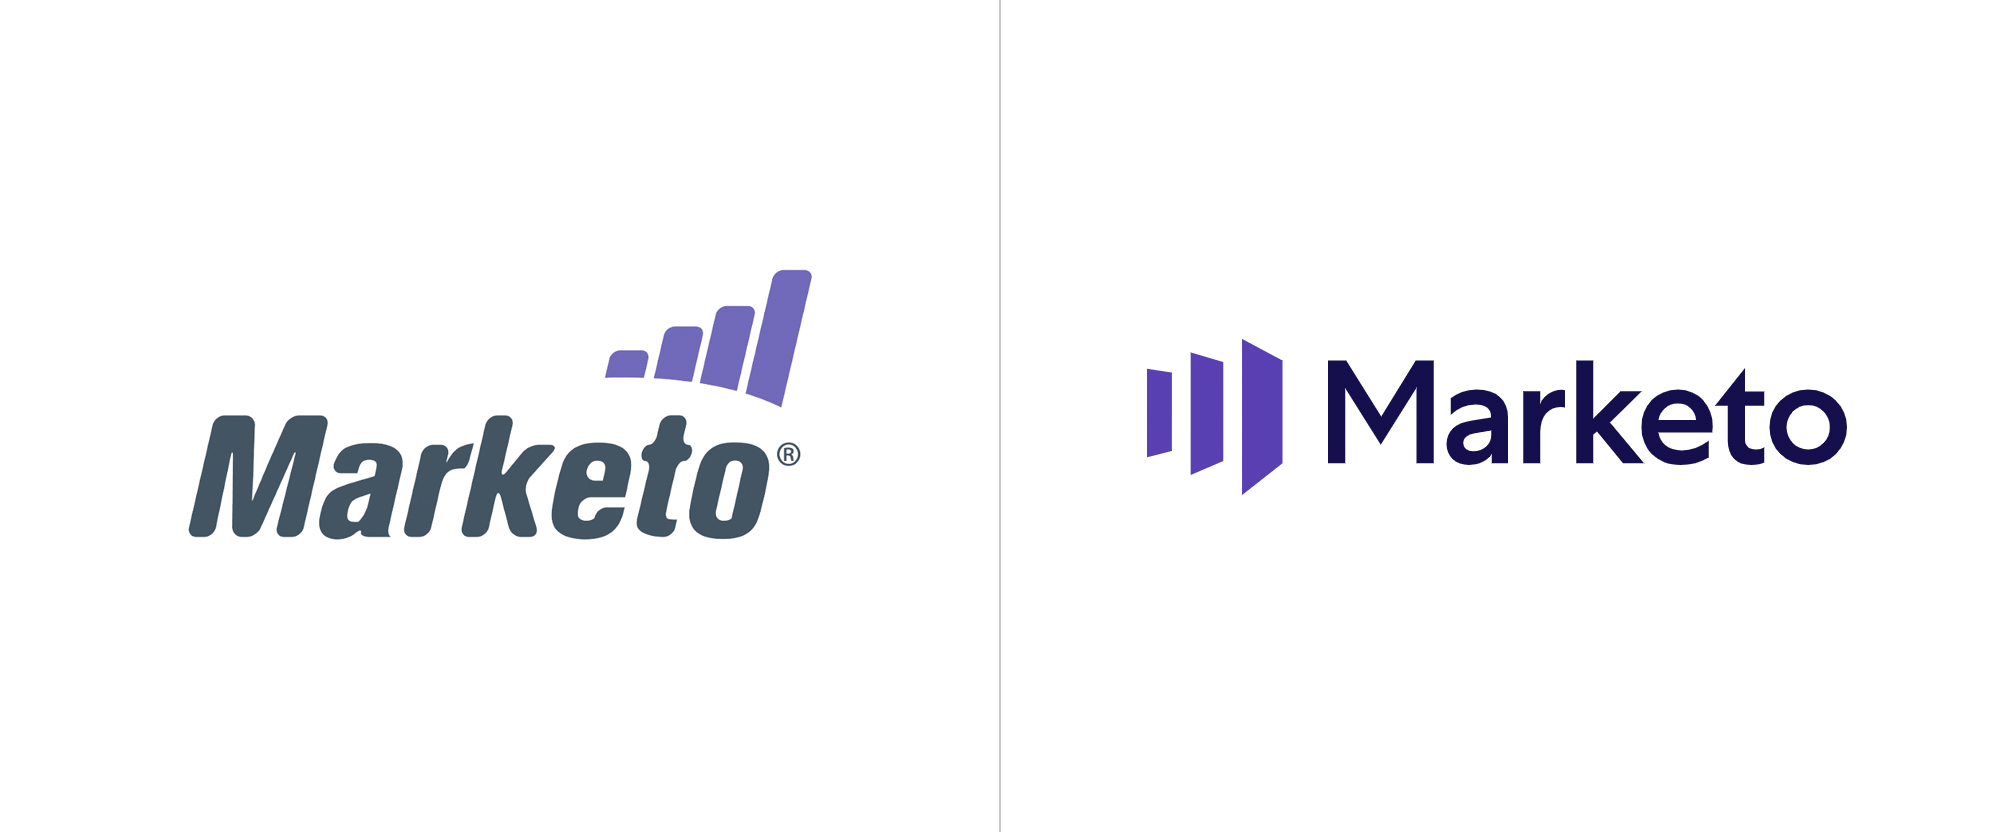 Follow Logo - Brand New: Follow-up: New Logo and Identity for Marketo by Focus Lab